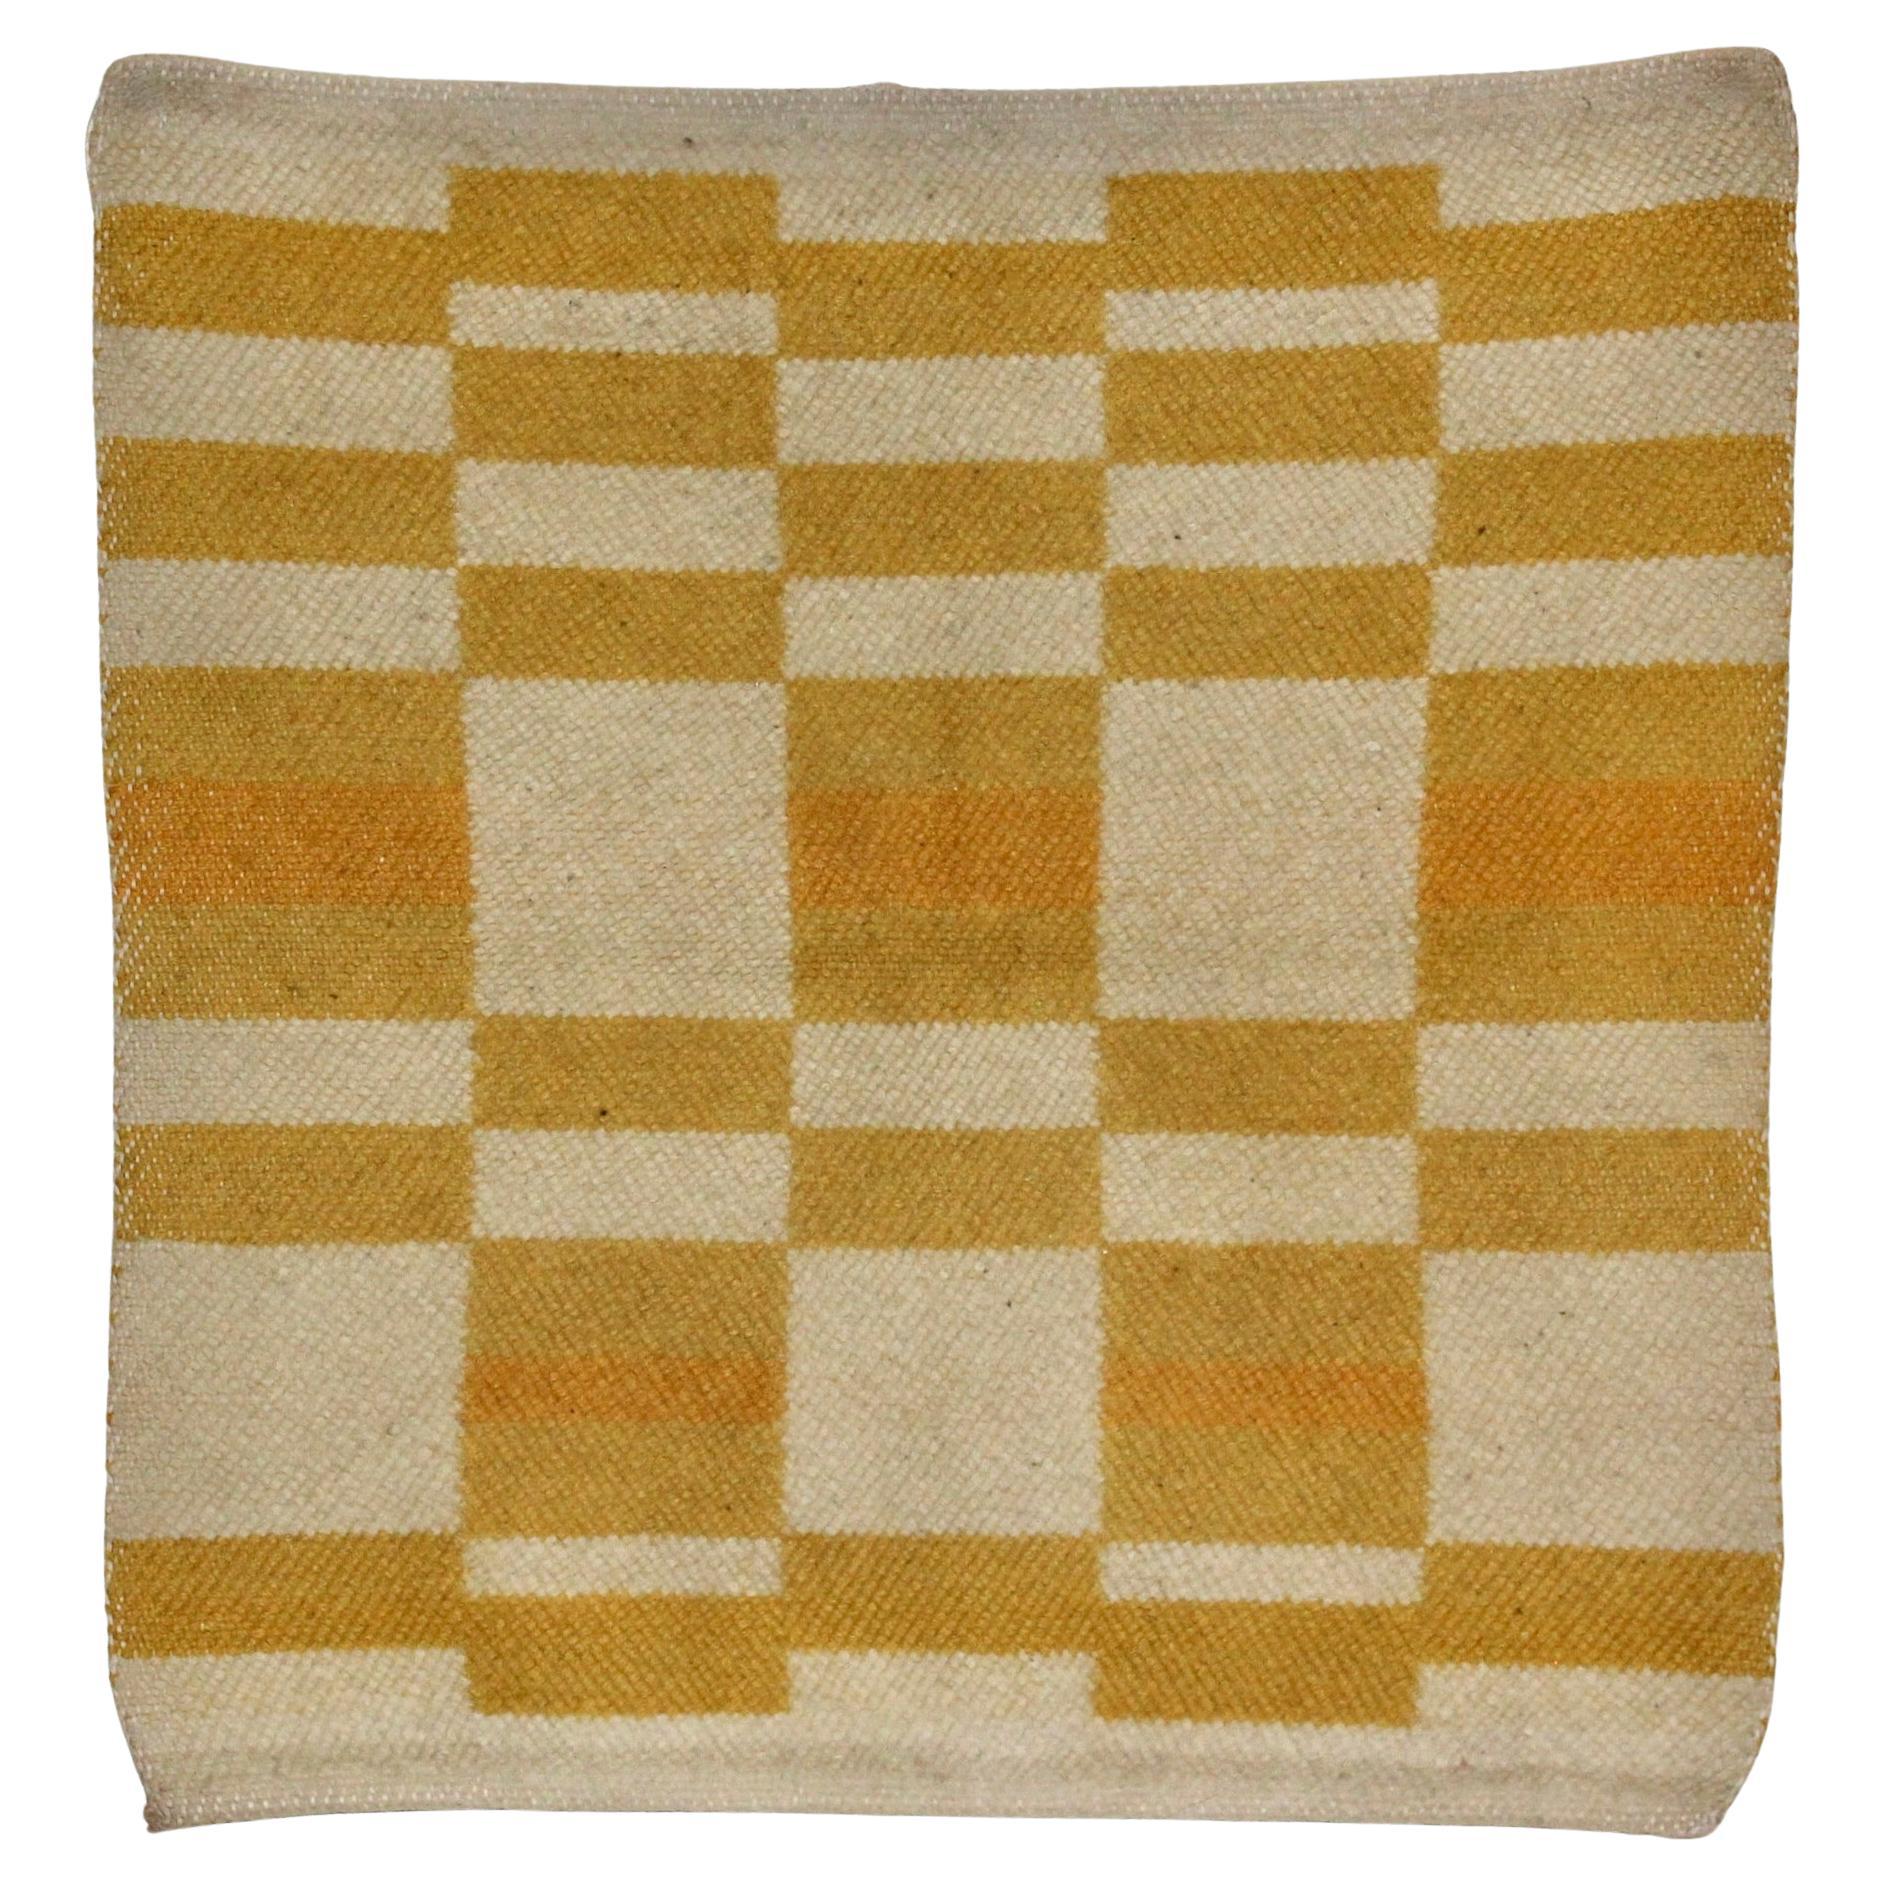 Important Anni Albers style Bauhaus or Black Mountain Period Hand Weaving For Sale